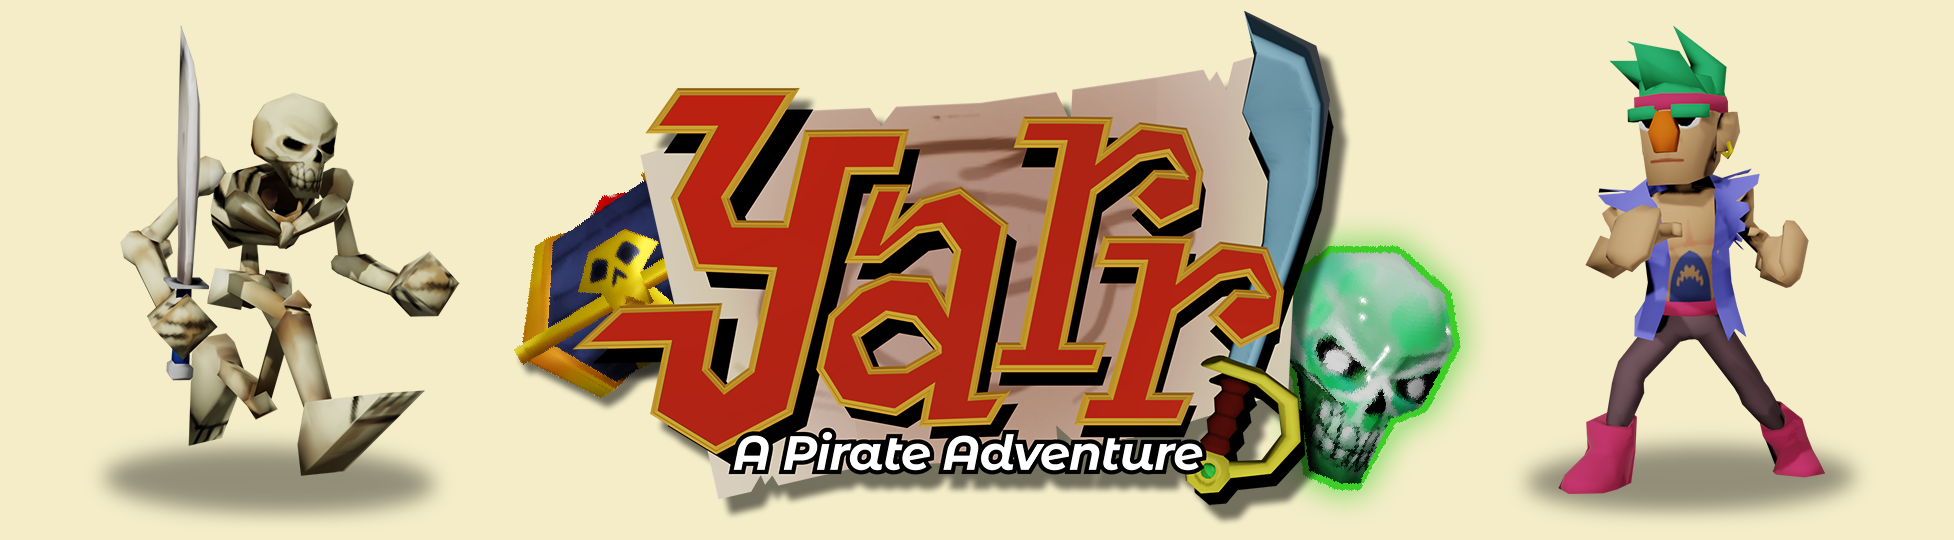 Yarr! A Pirate Adventure - 32bit Spring Cleaning Jam 2023